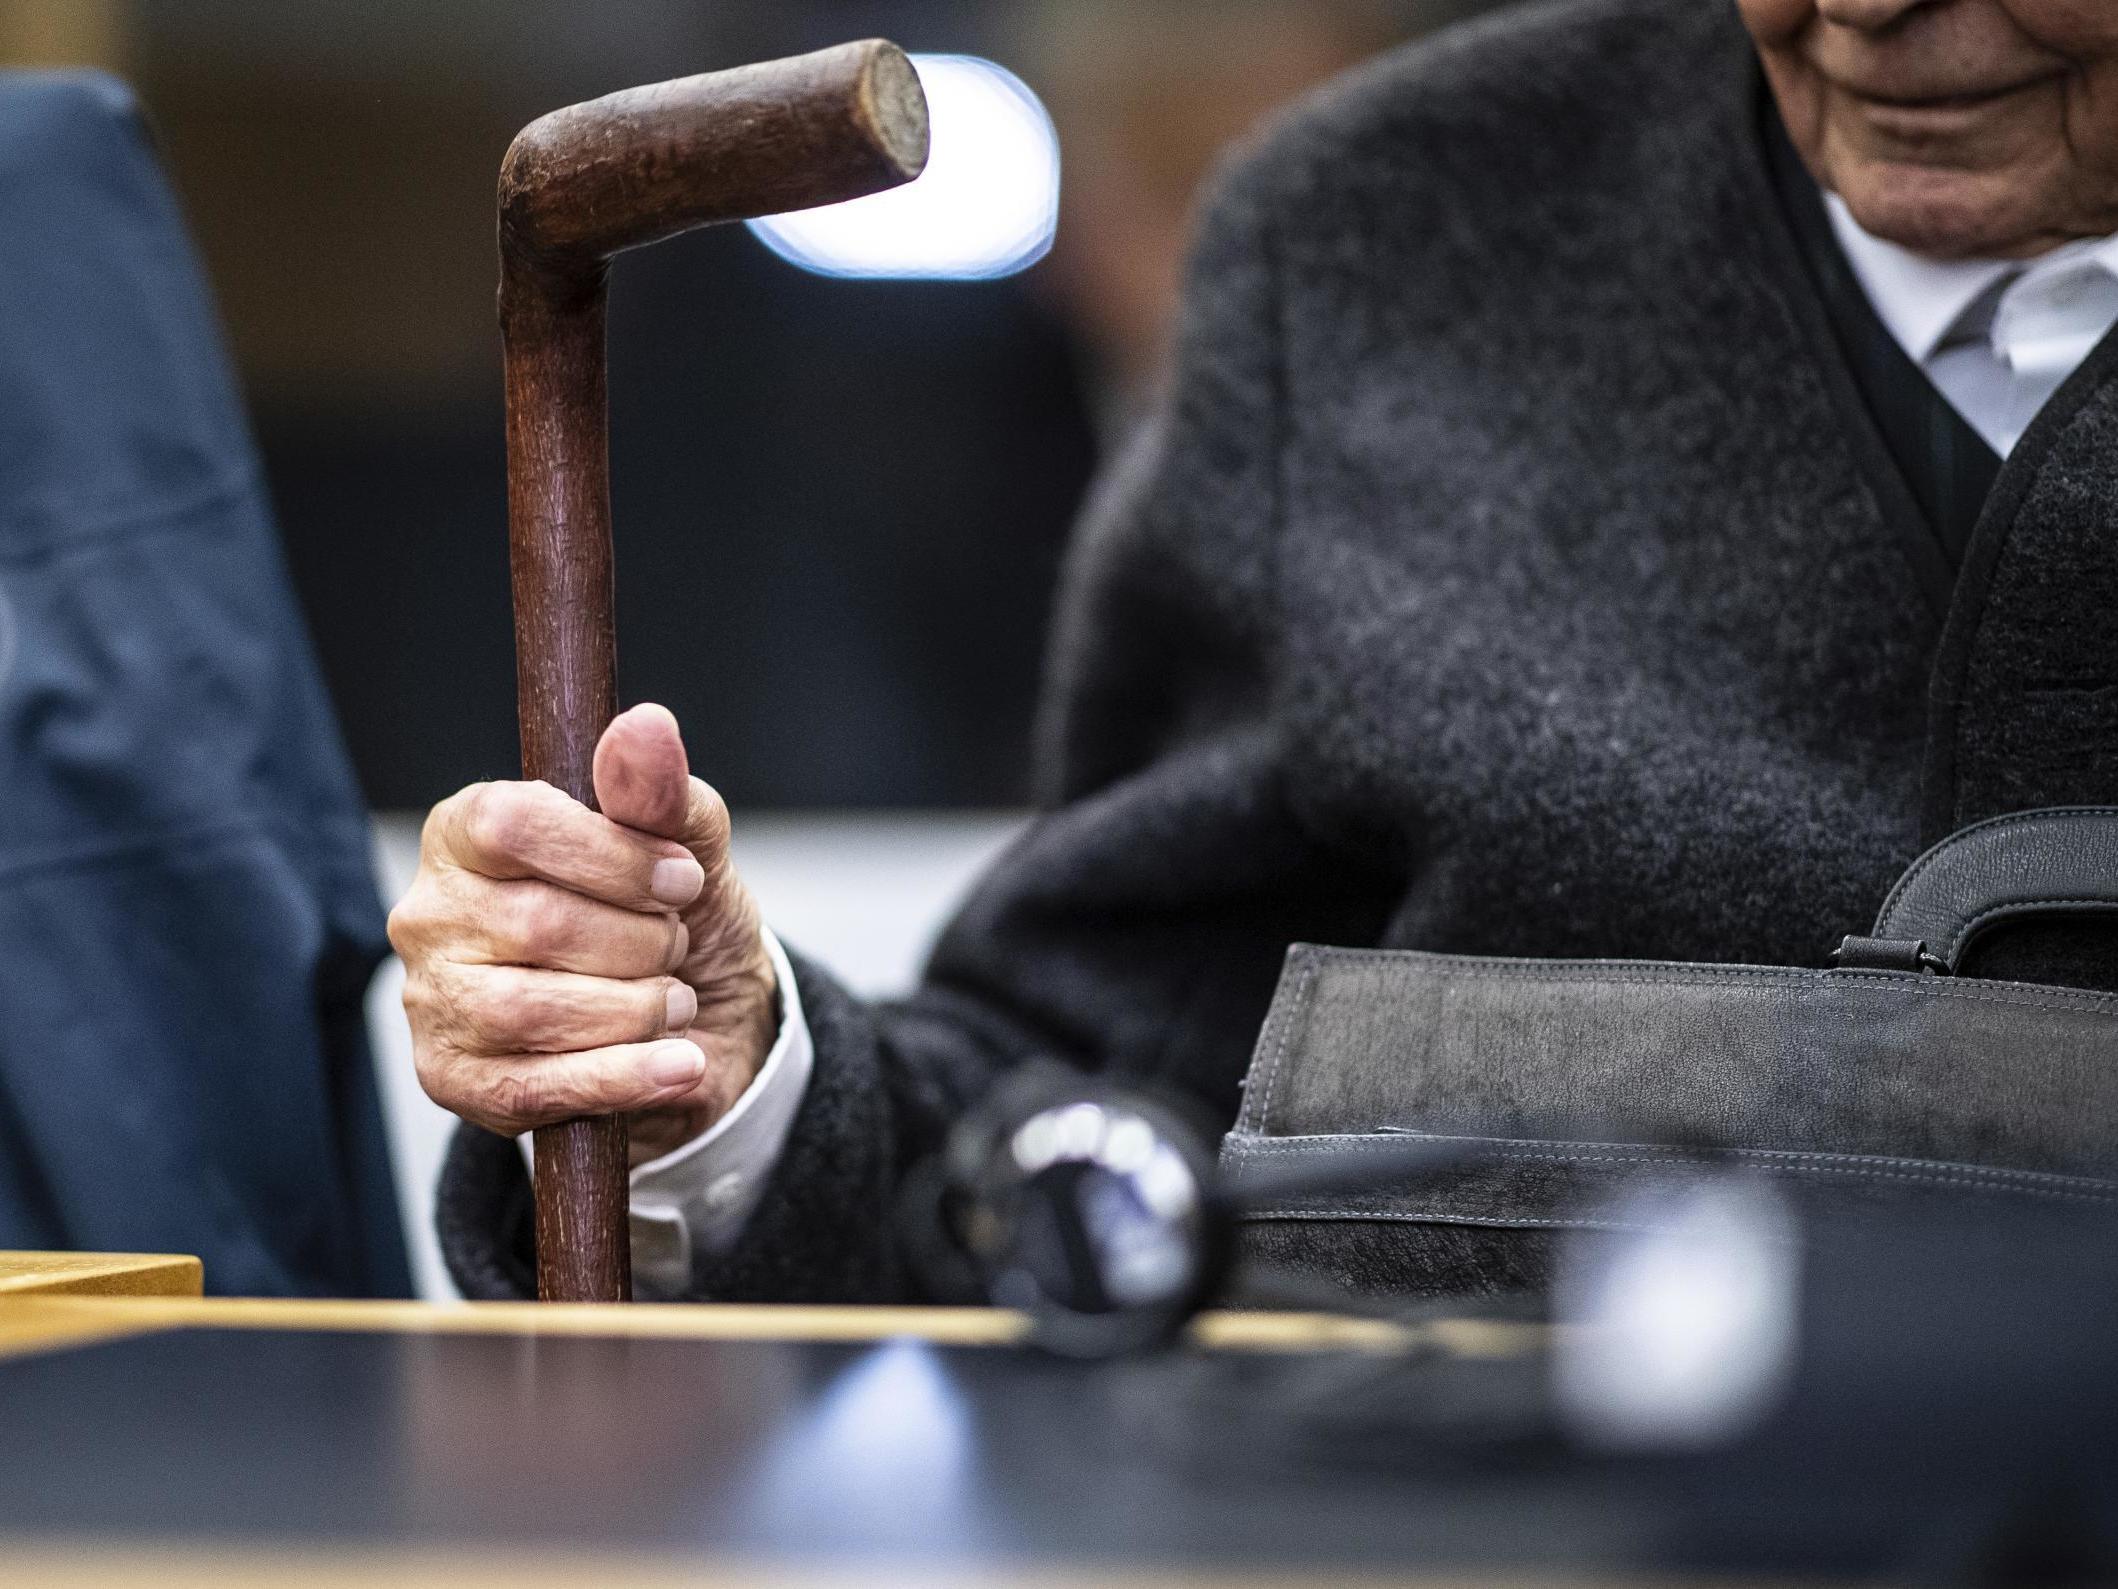 The 94-year old former SS enlisted man waits for the beginning of the third day of his trial at the regional court in Muenster, western Germany, Tuesday 13 November 2018 (Guido Kirchner/pool photo via